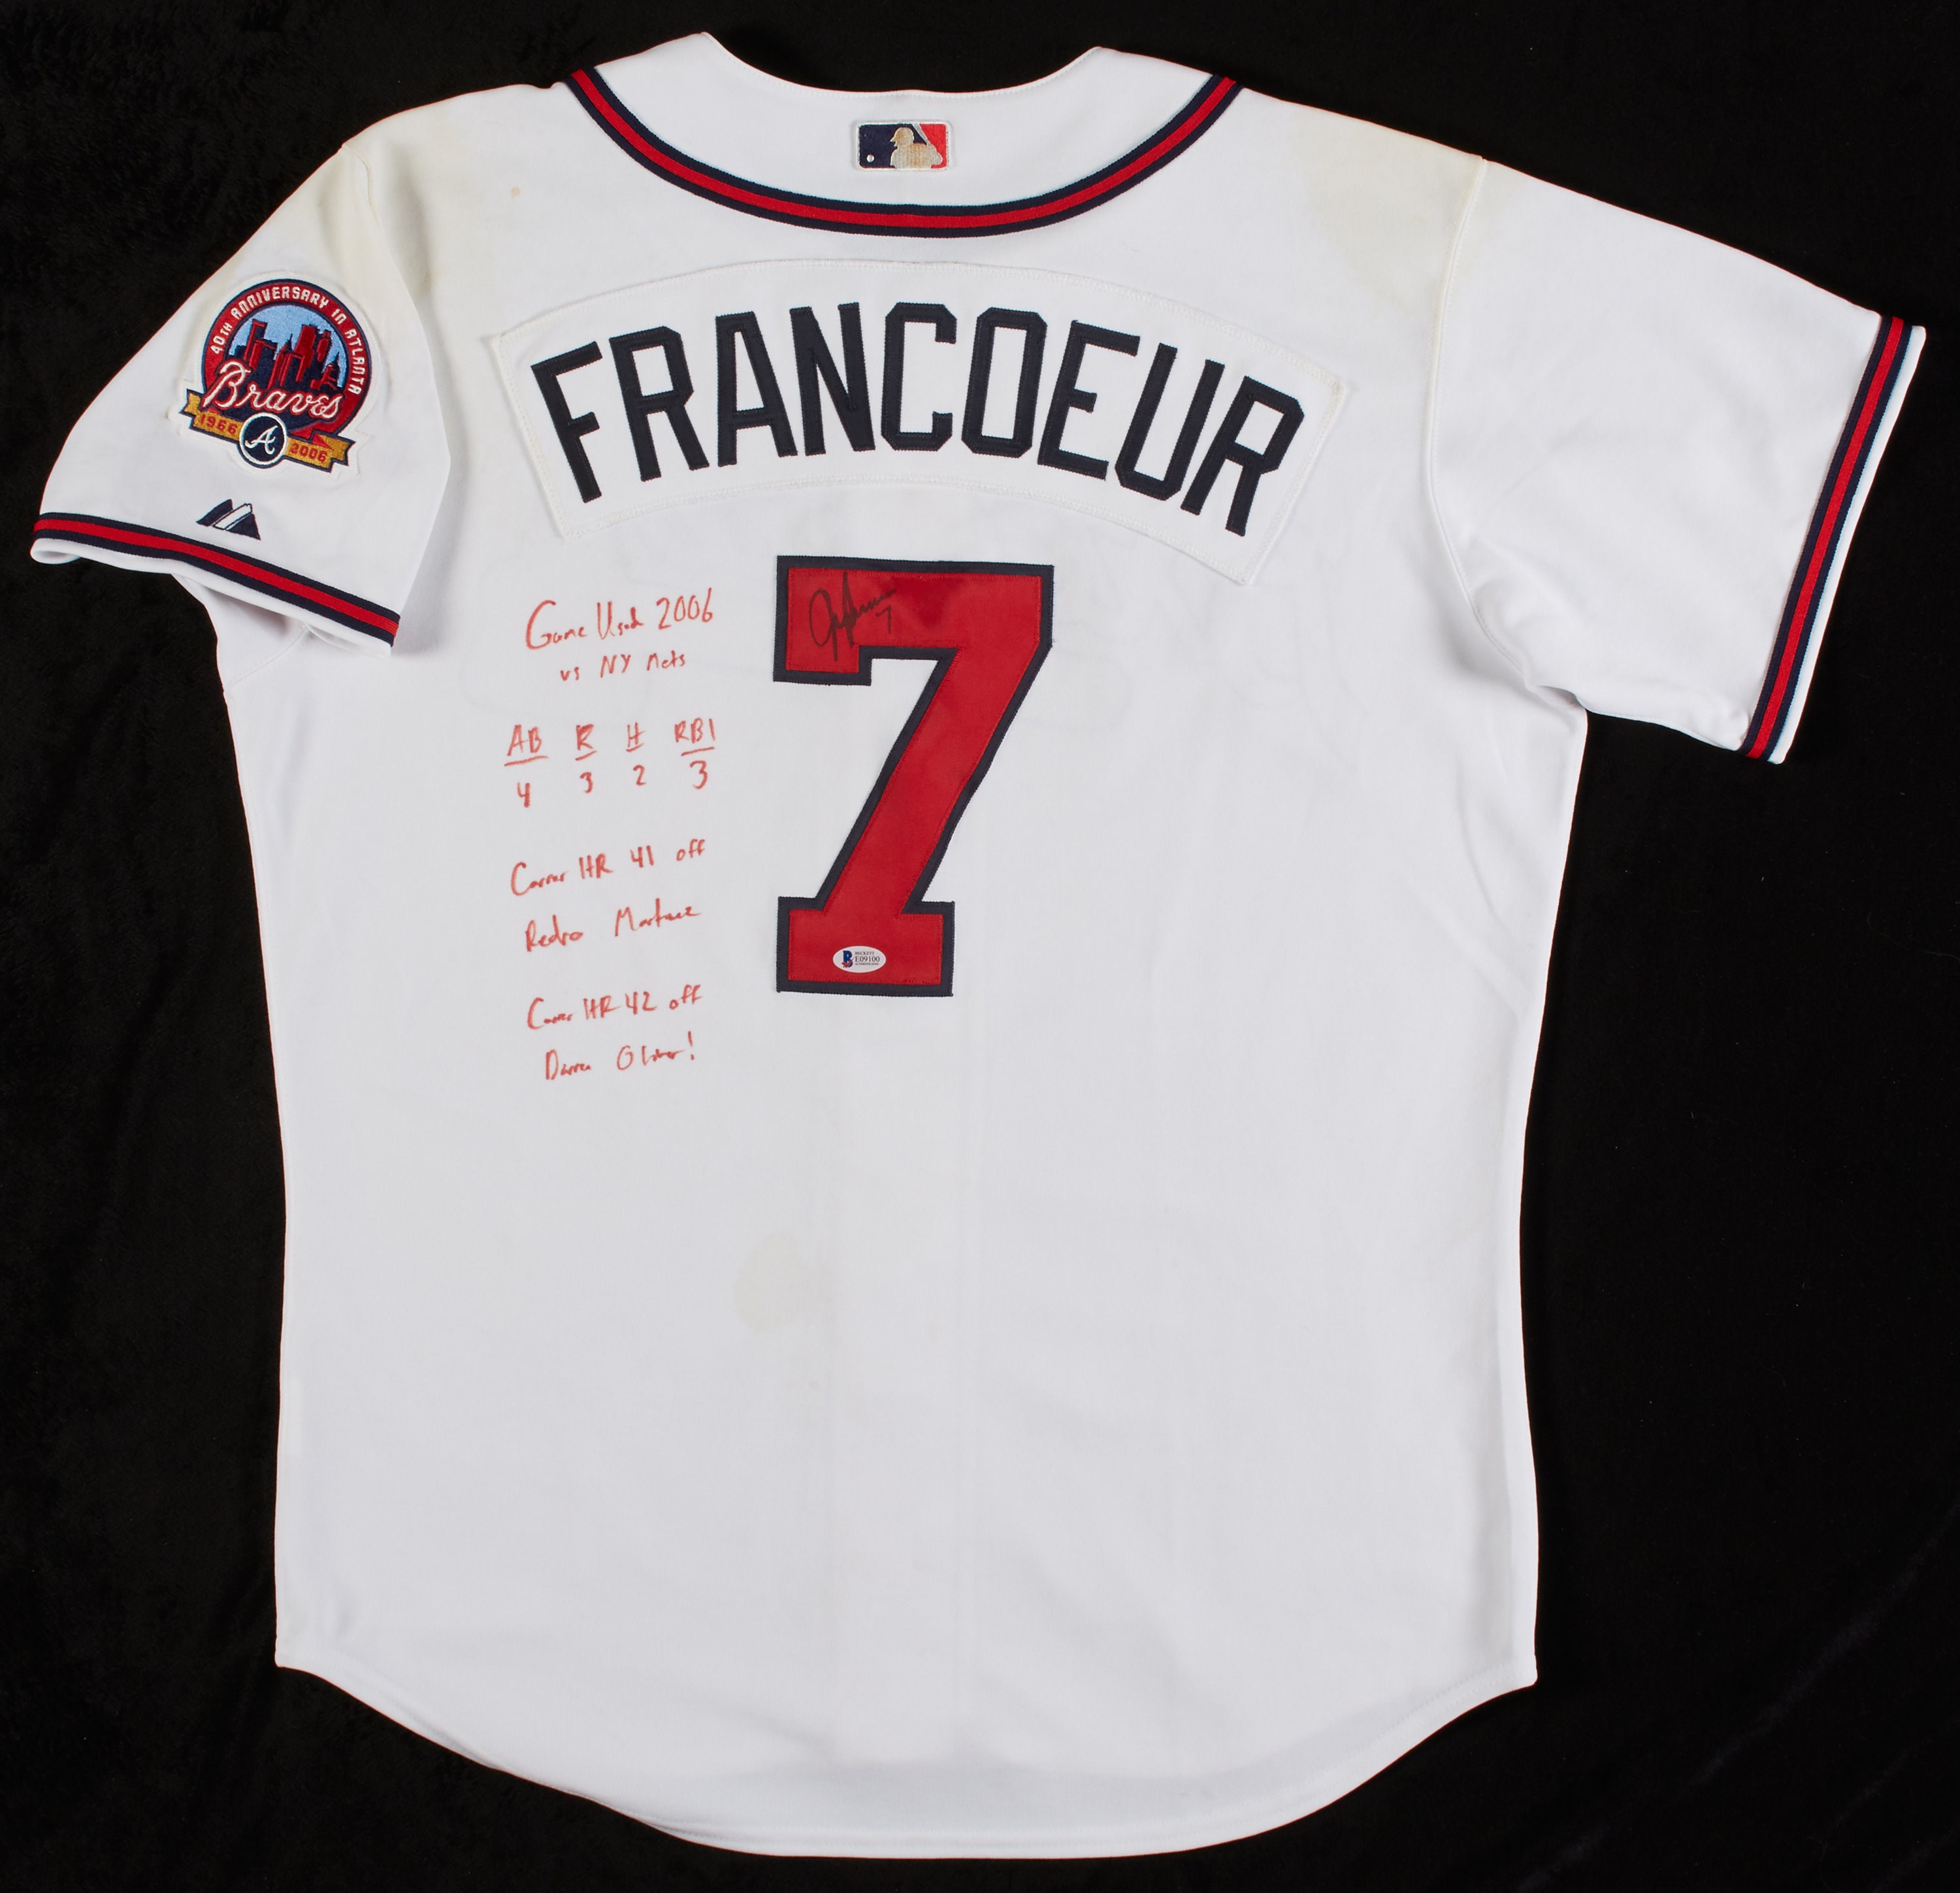 Baseball Equipment - 9/27/06 Jeff Franceour 2-Home Run Game Worn Jersey - Career HRs #41 & #42 (Heavily Signed and Inscribed)